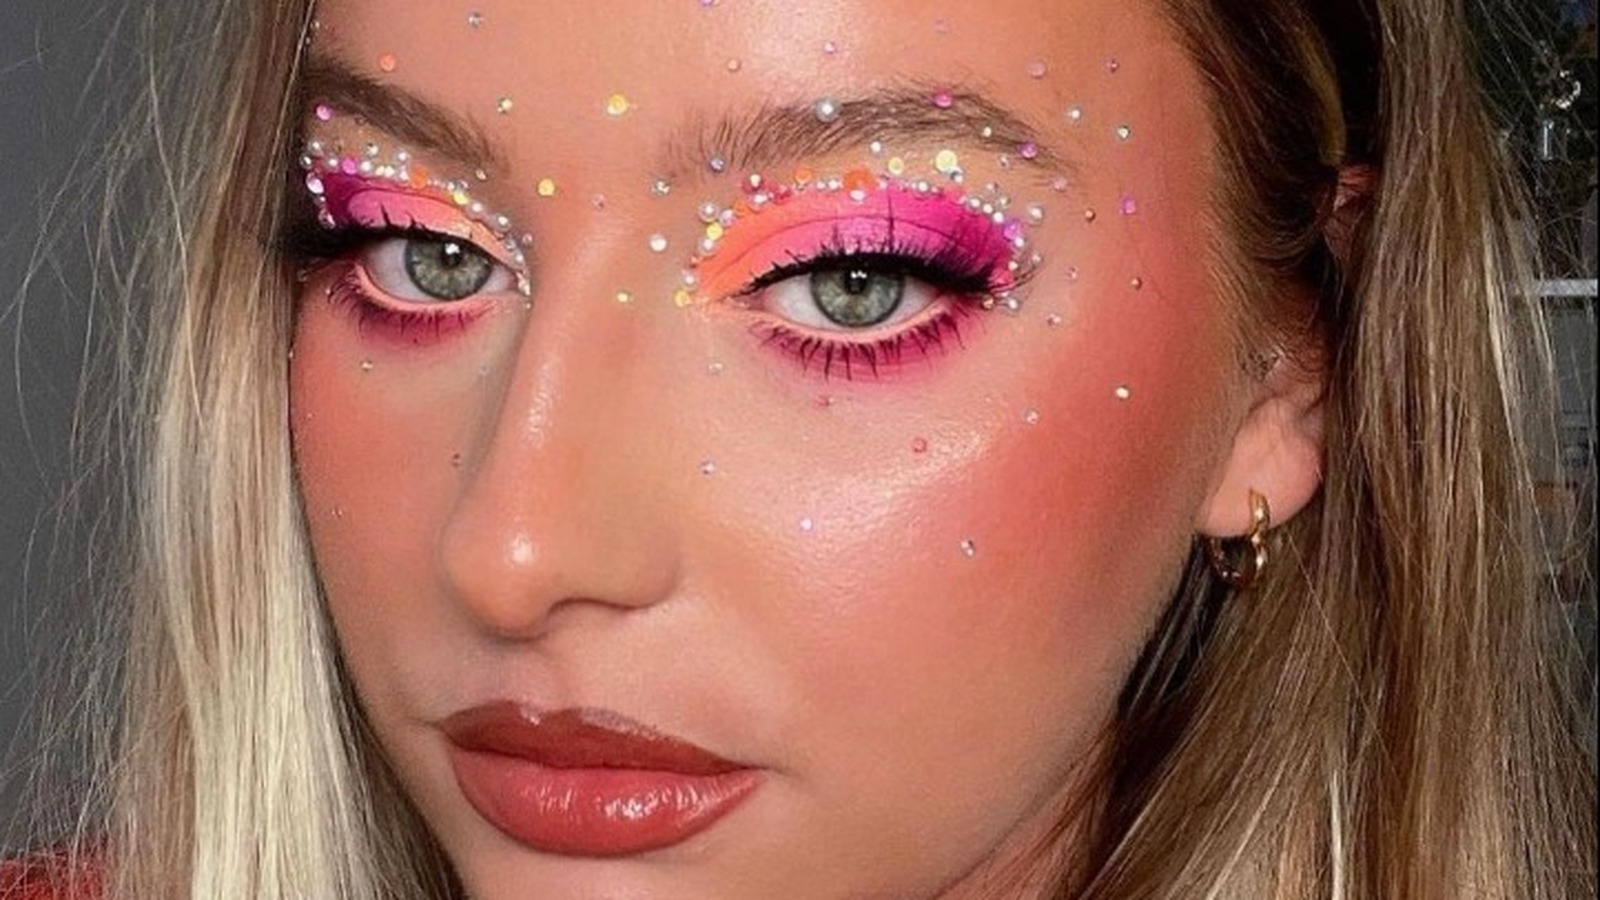 Festival Glitter: How To Apply And Remove Glitter Like A Total Pro